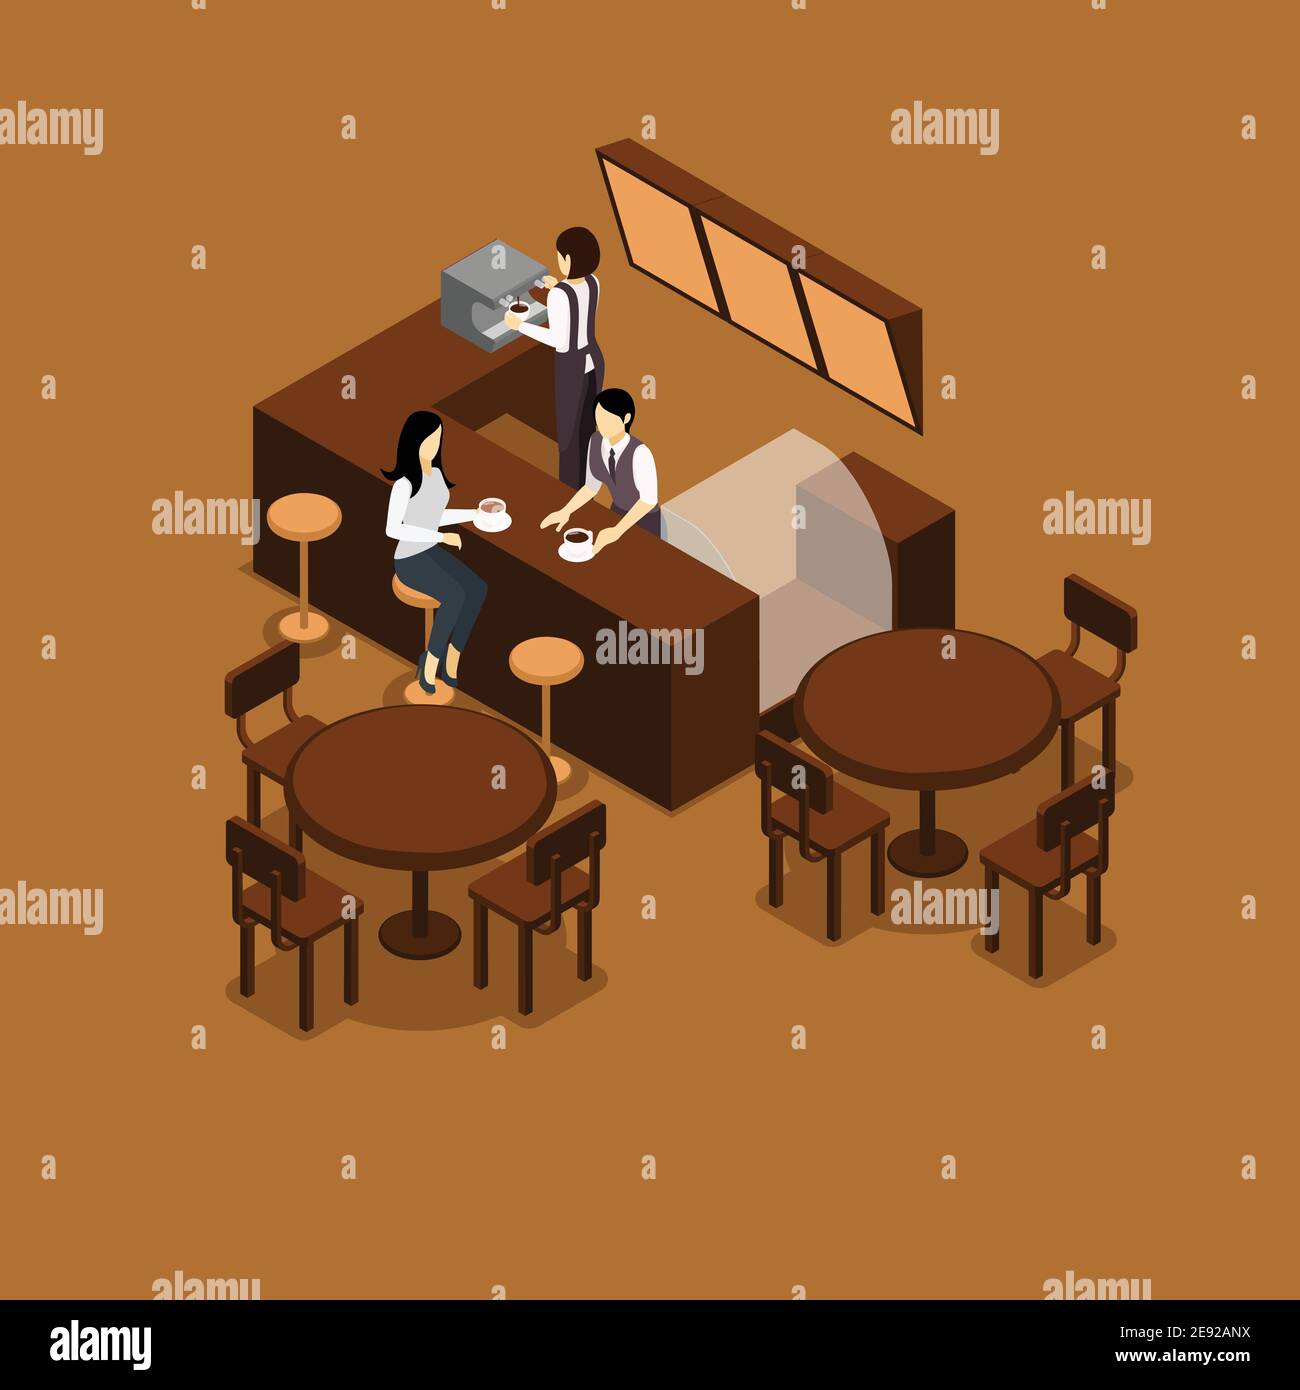 Waitress barista making coffee for people in a cafe isometric vector illustration Stock Vector